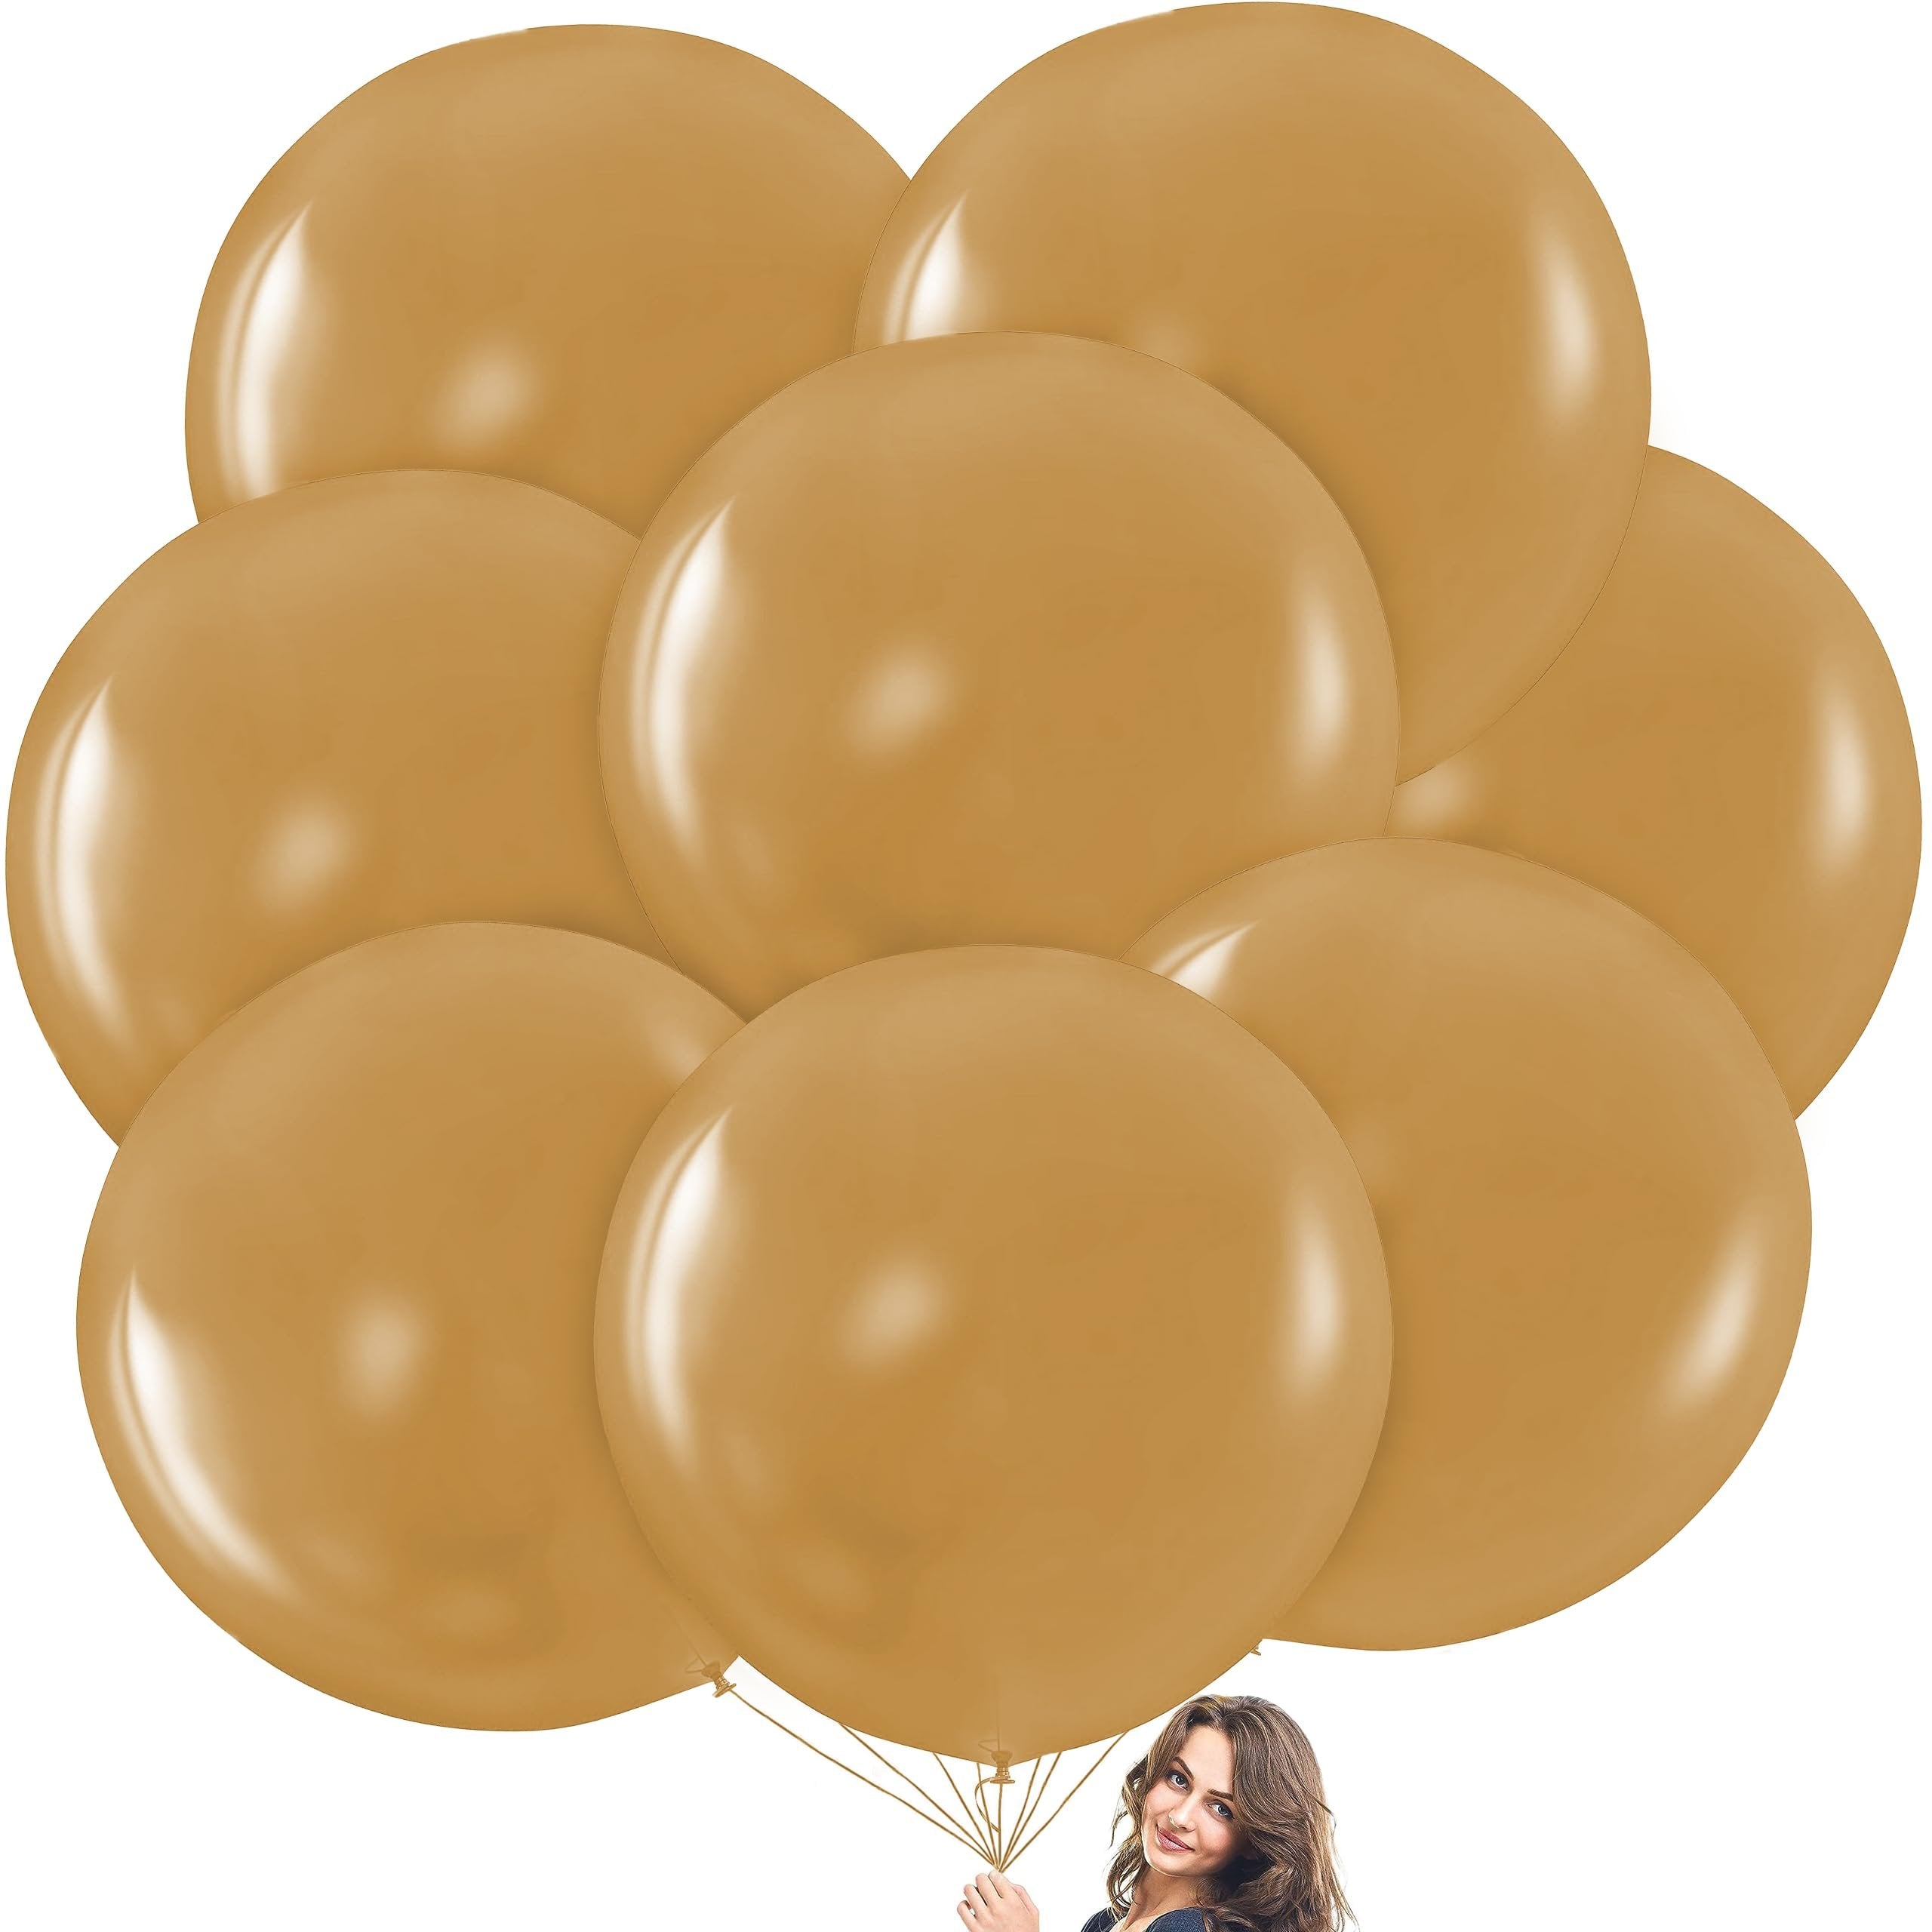 Prextex Gold Giant Balloons - 8 Jumbo 36 Inch Gold Balloons for Photo Shoot, Wedding, Baby Shower, Birthday Party and Event Decoration - Strong Latex Big Round Balloons - Helium Quality